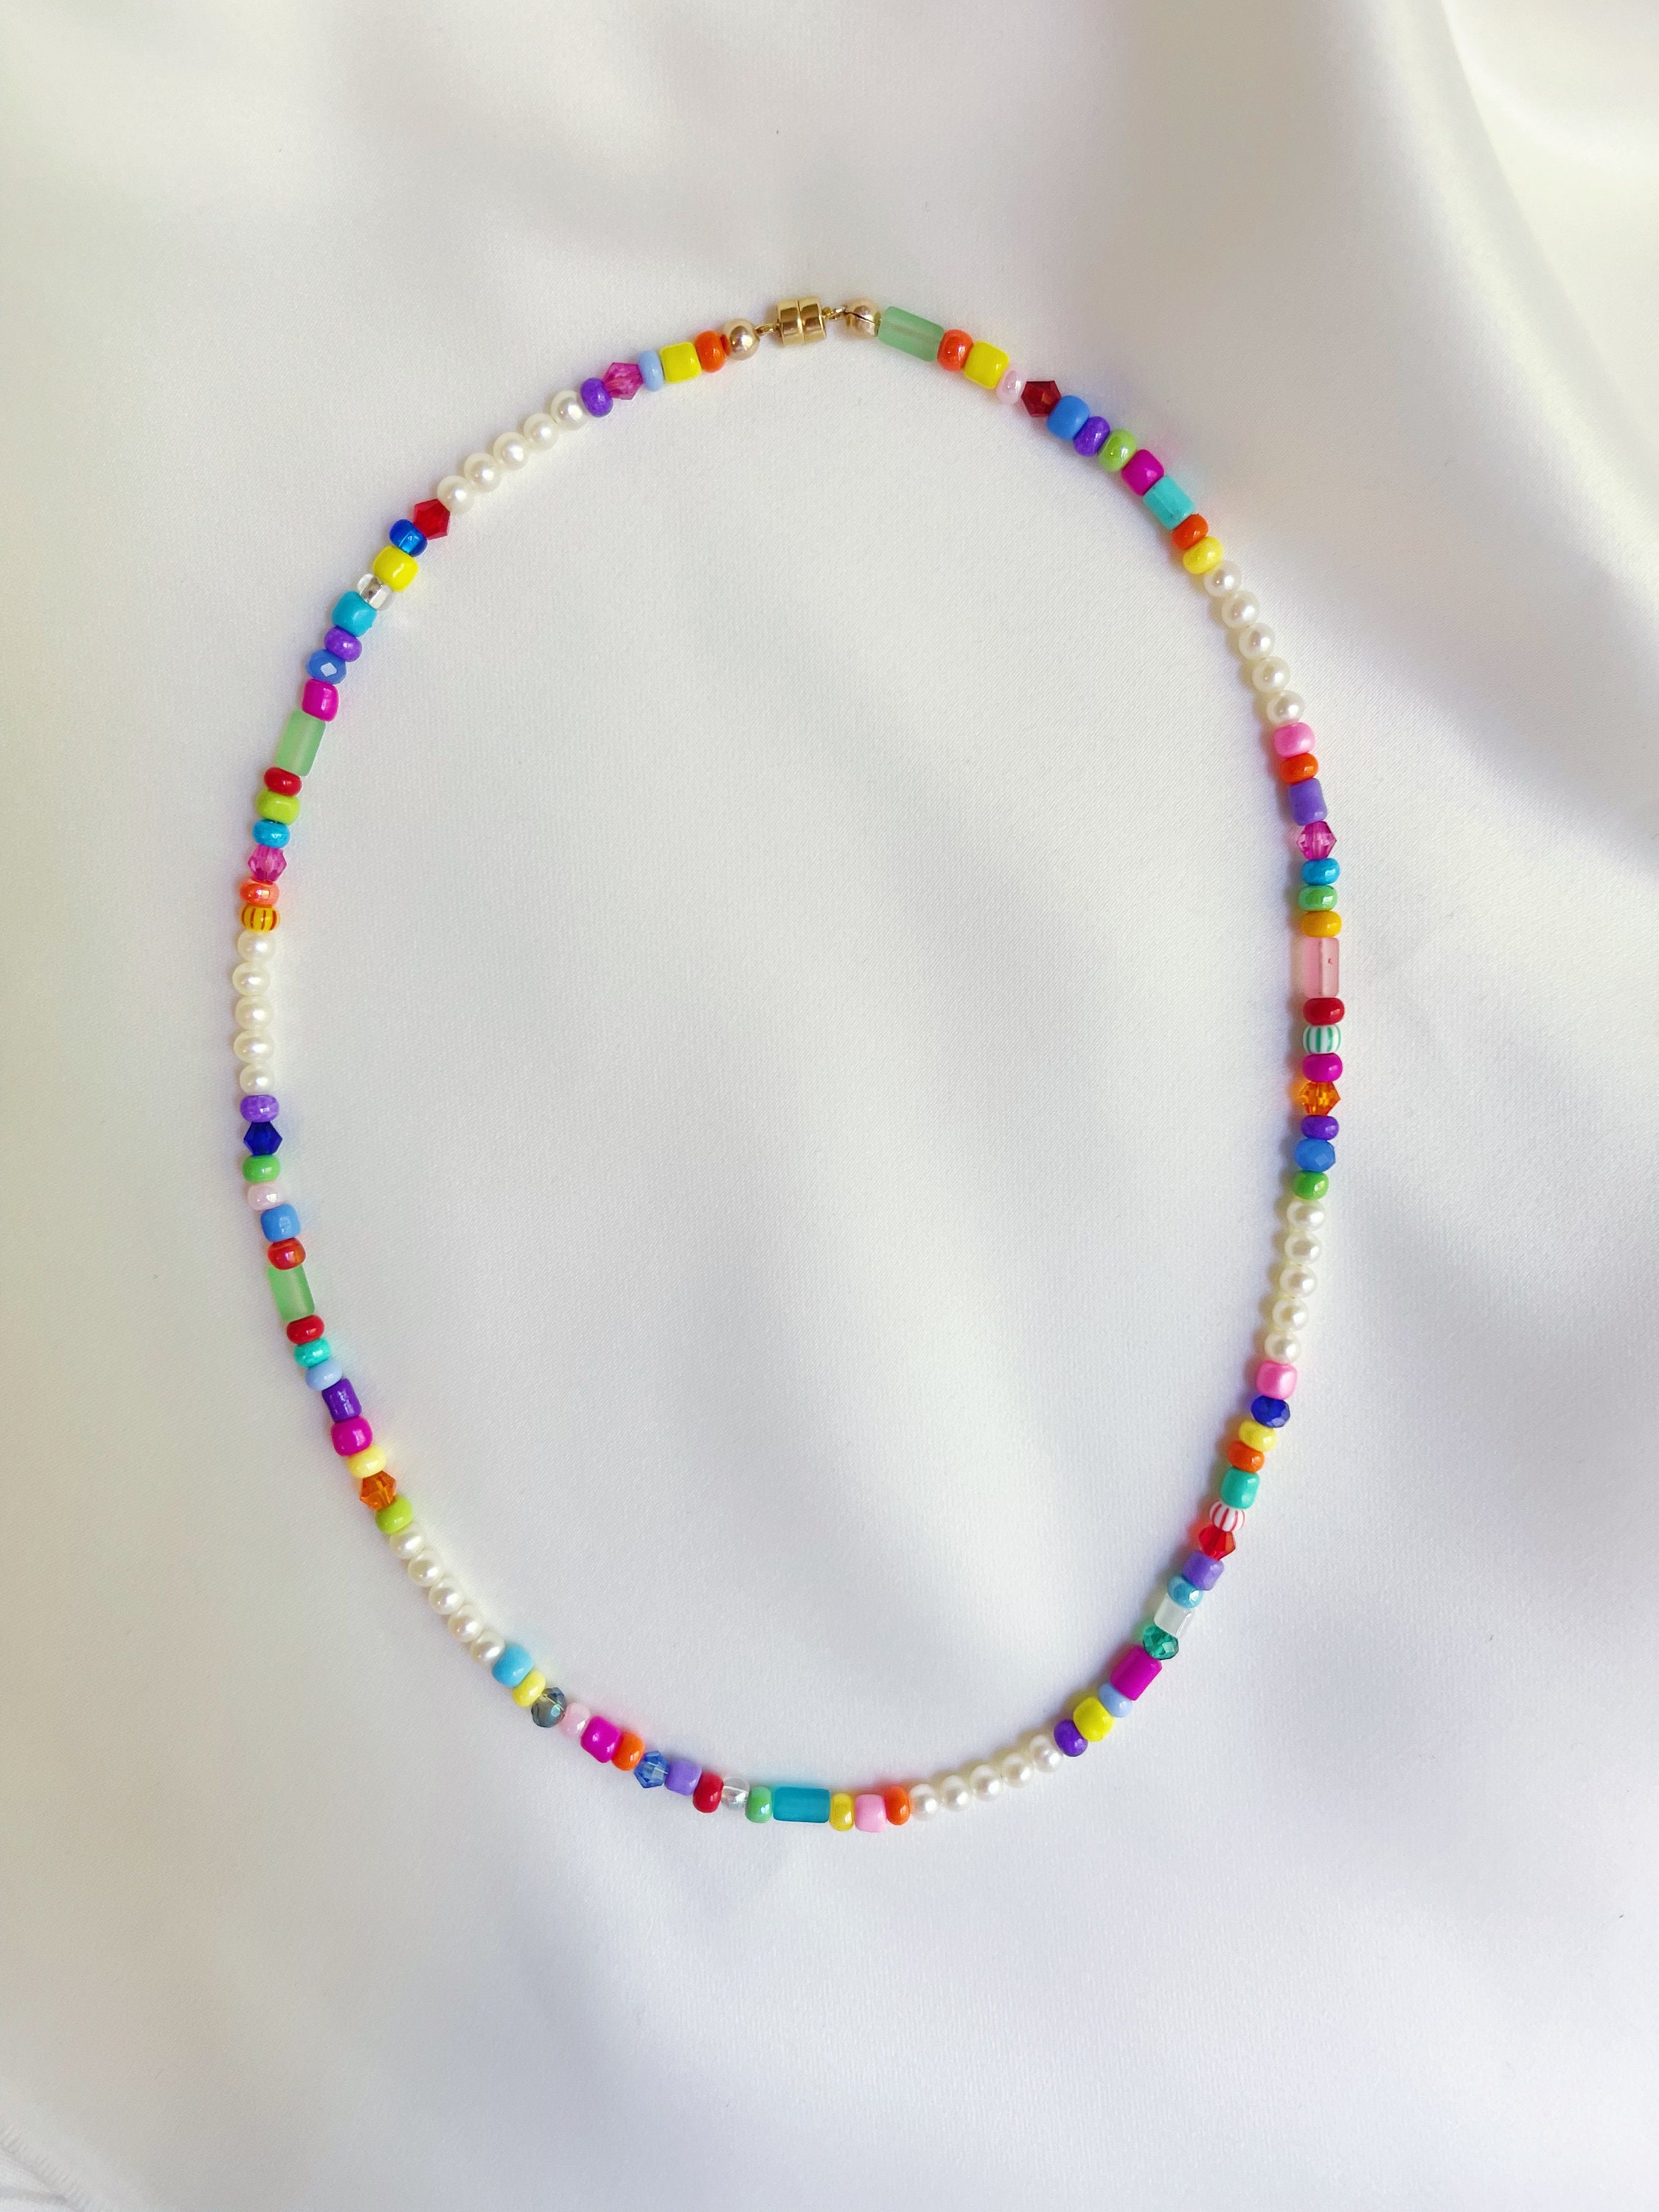 Shop — Mon Ete Studio | Colorful Beaded Jewelry with Freshwater Pearls ...